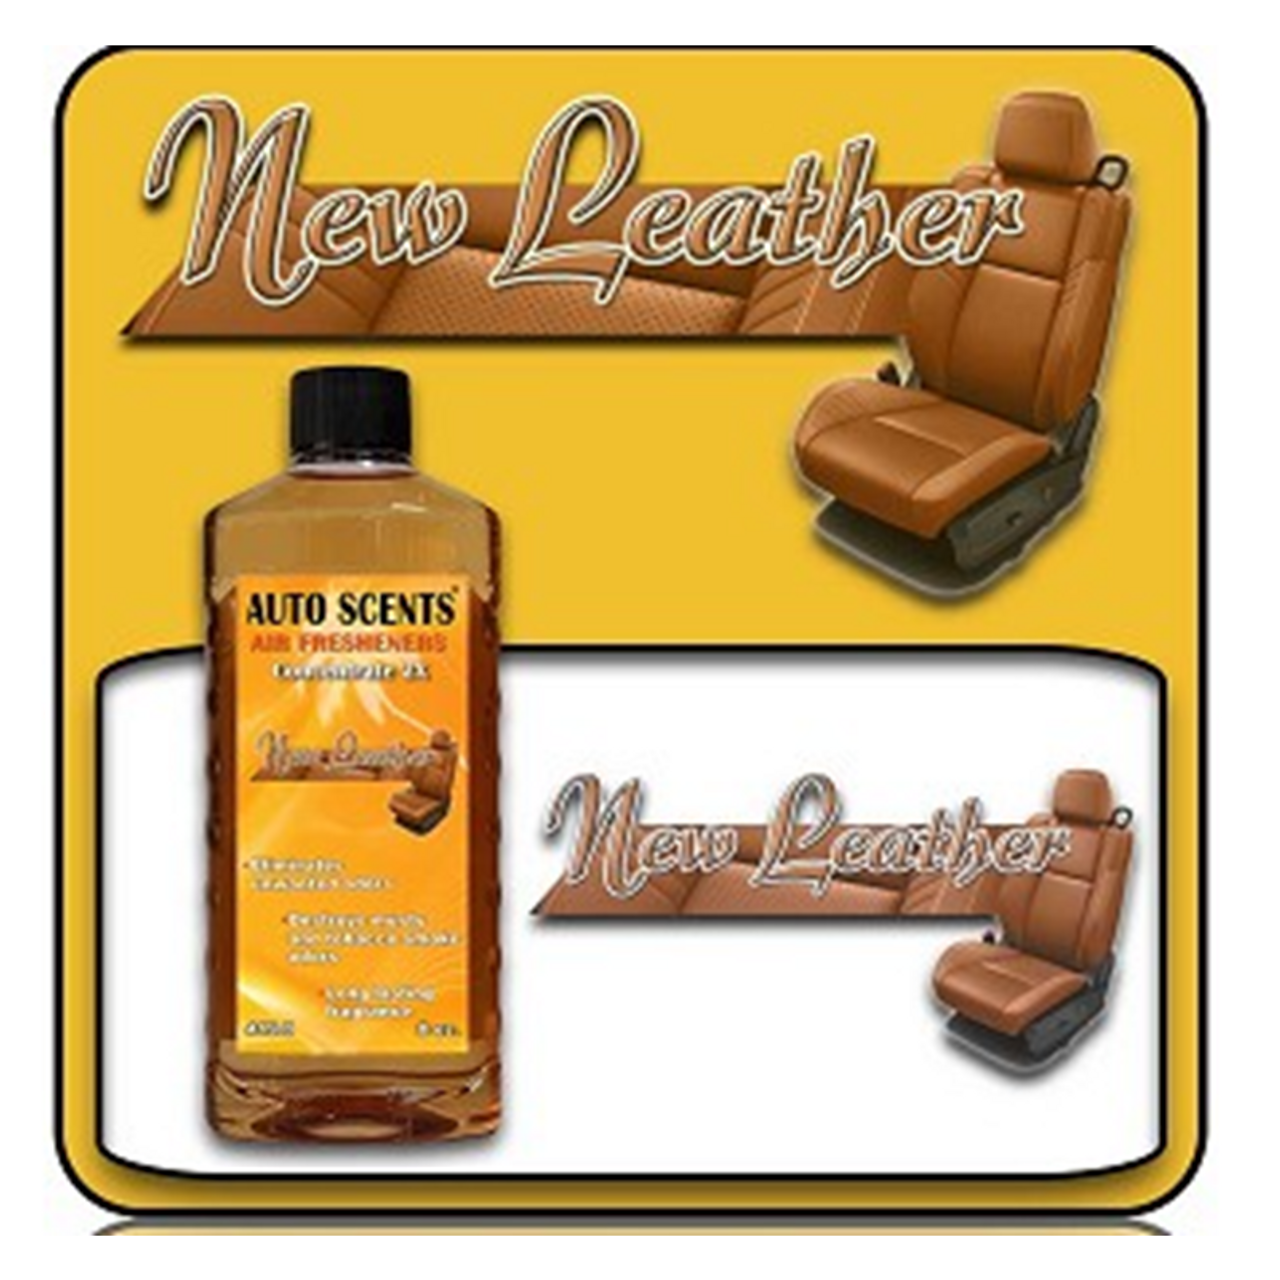 New Leather Air Freshener Concentrate 8 oz